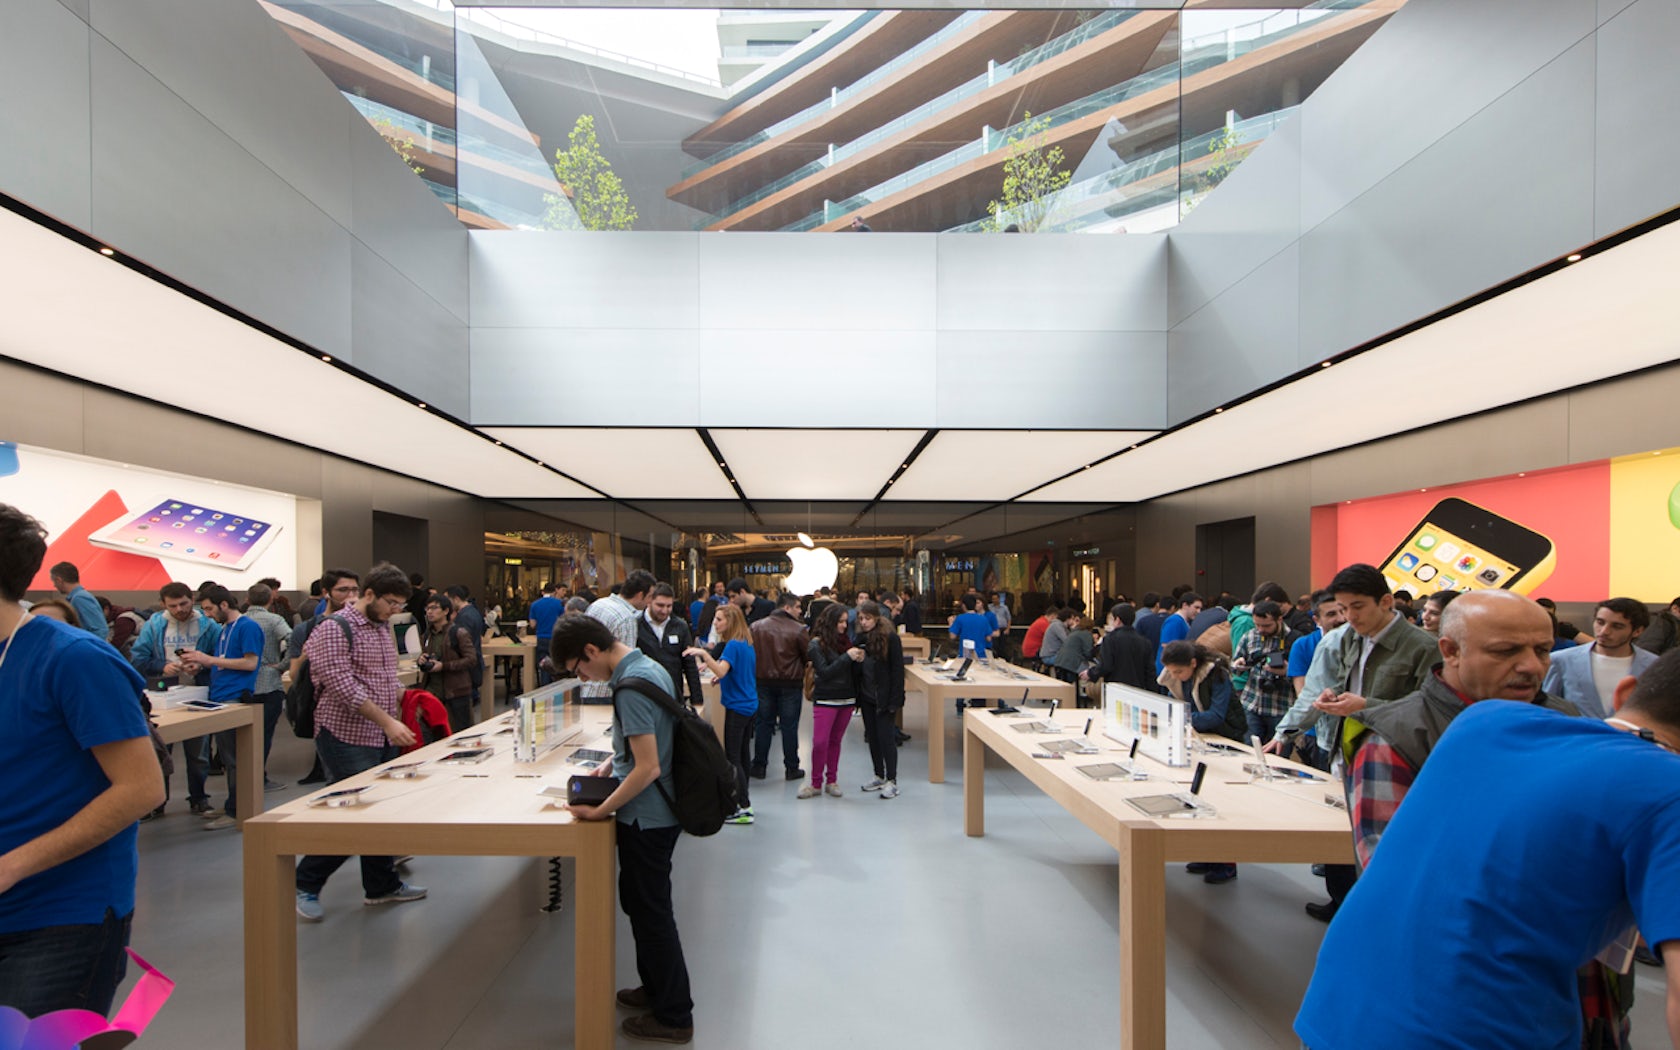 The Immaculate Architectural Details of Apple Stores - Architizer